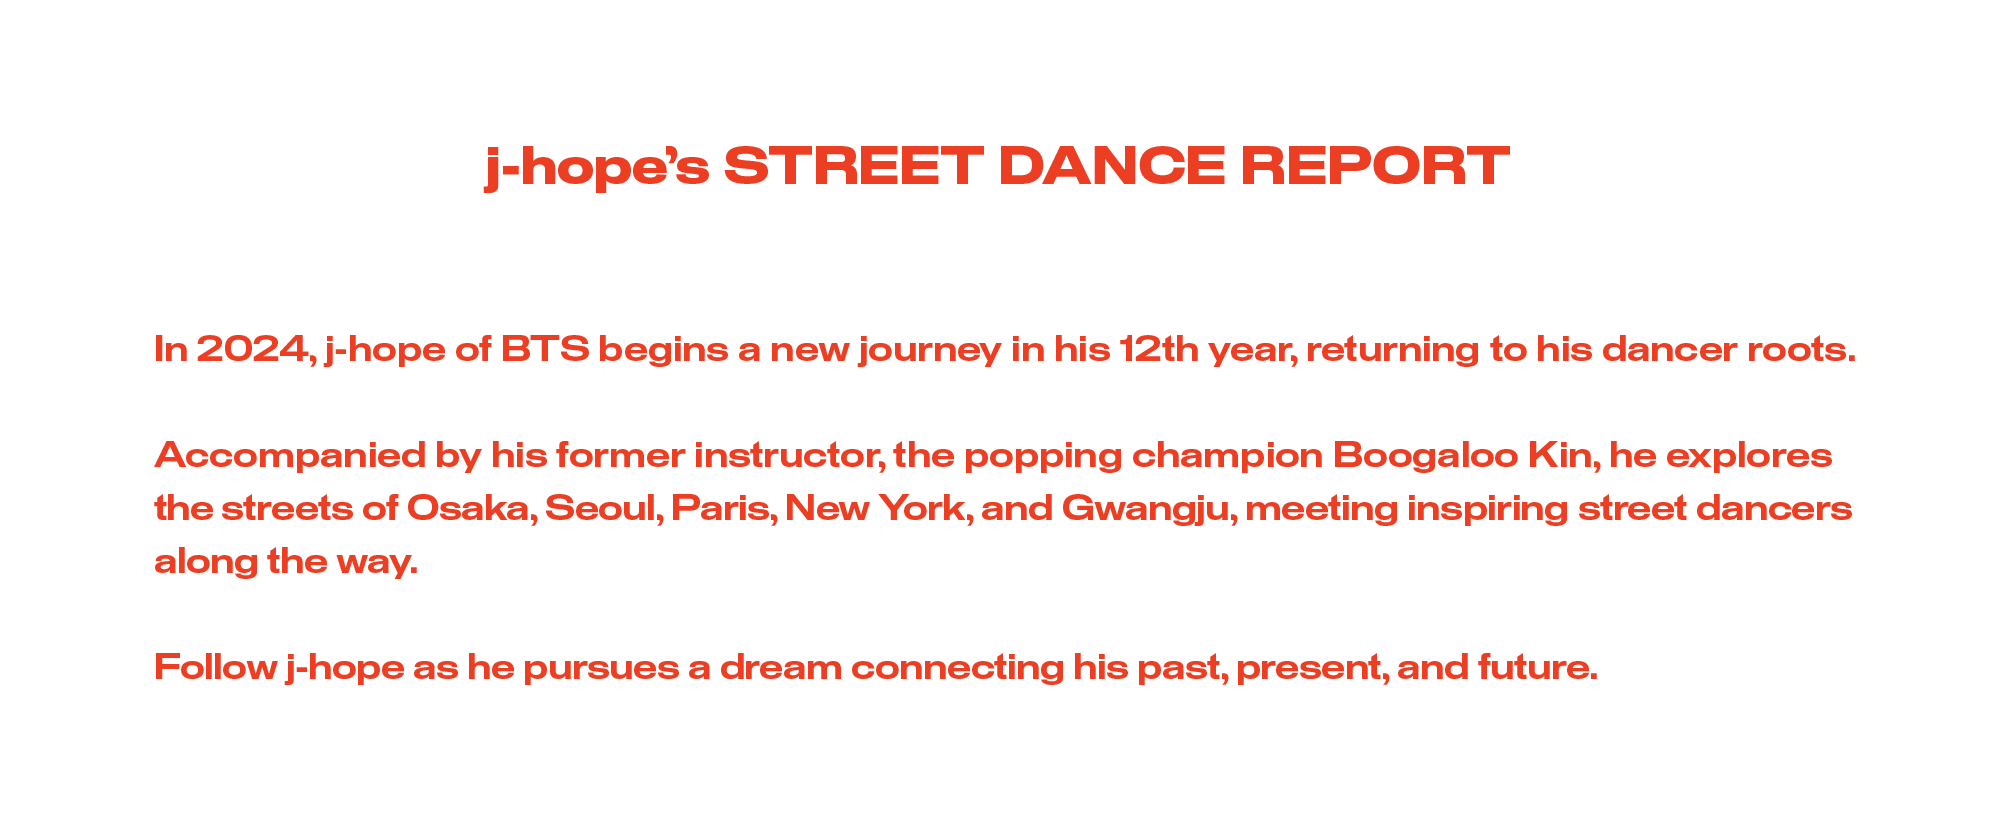 j-hope’s STREET DANCE REPORT. In 2024, j-hope of BTS begins a new journey in his 12th year, returning to his dancer roots. Accompanied by his former instructor, the popping champion Boogaloo Kin, he explores the streets of Osaka, Seoul, Paris, New York, and Gwangju, meeting inspiring street dancers along the way. Follow j-hope as he pursues a dream connecting his past, present, and future. 